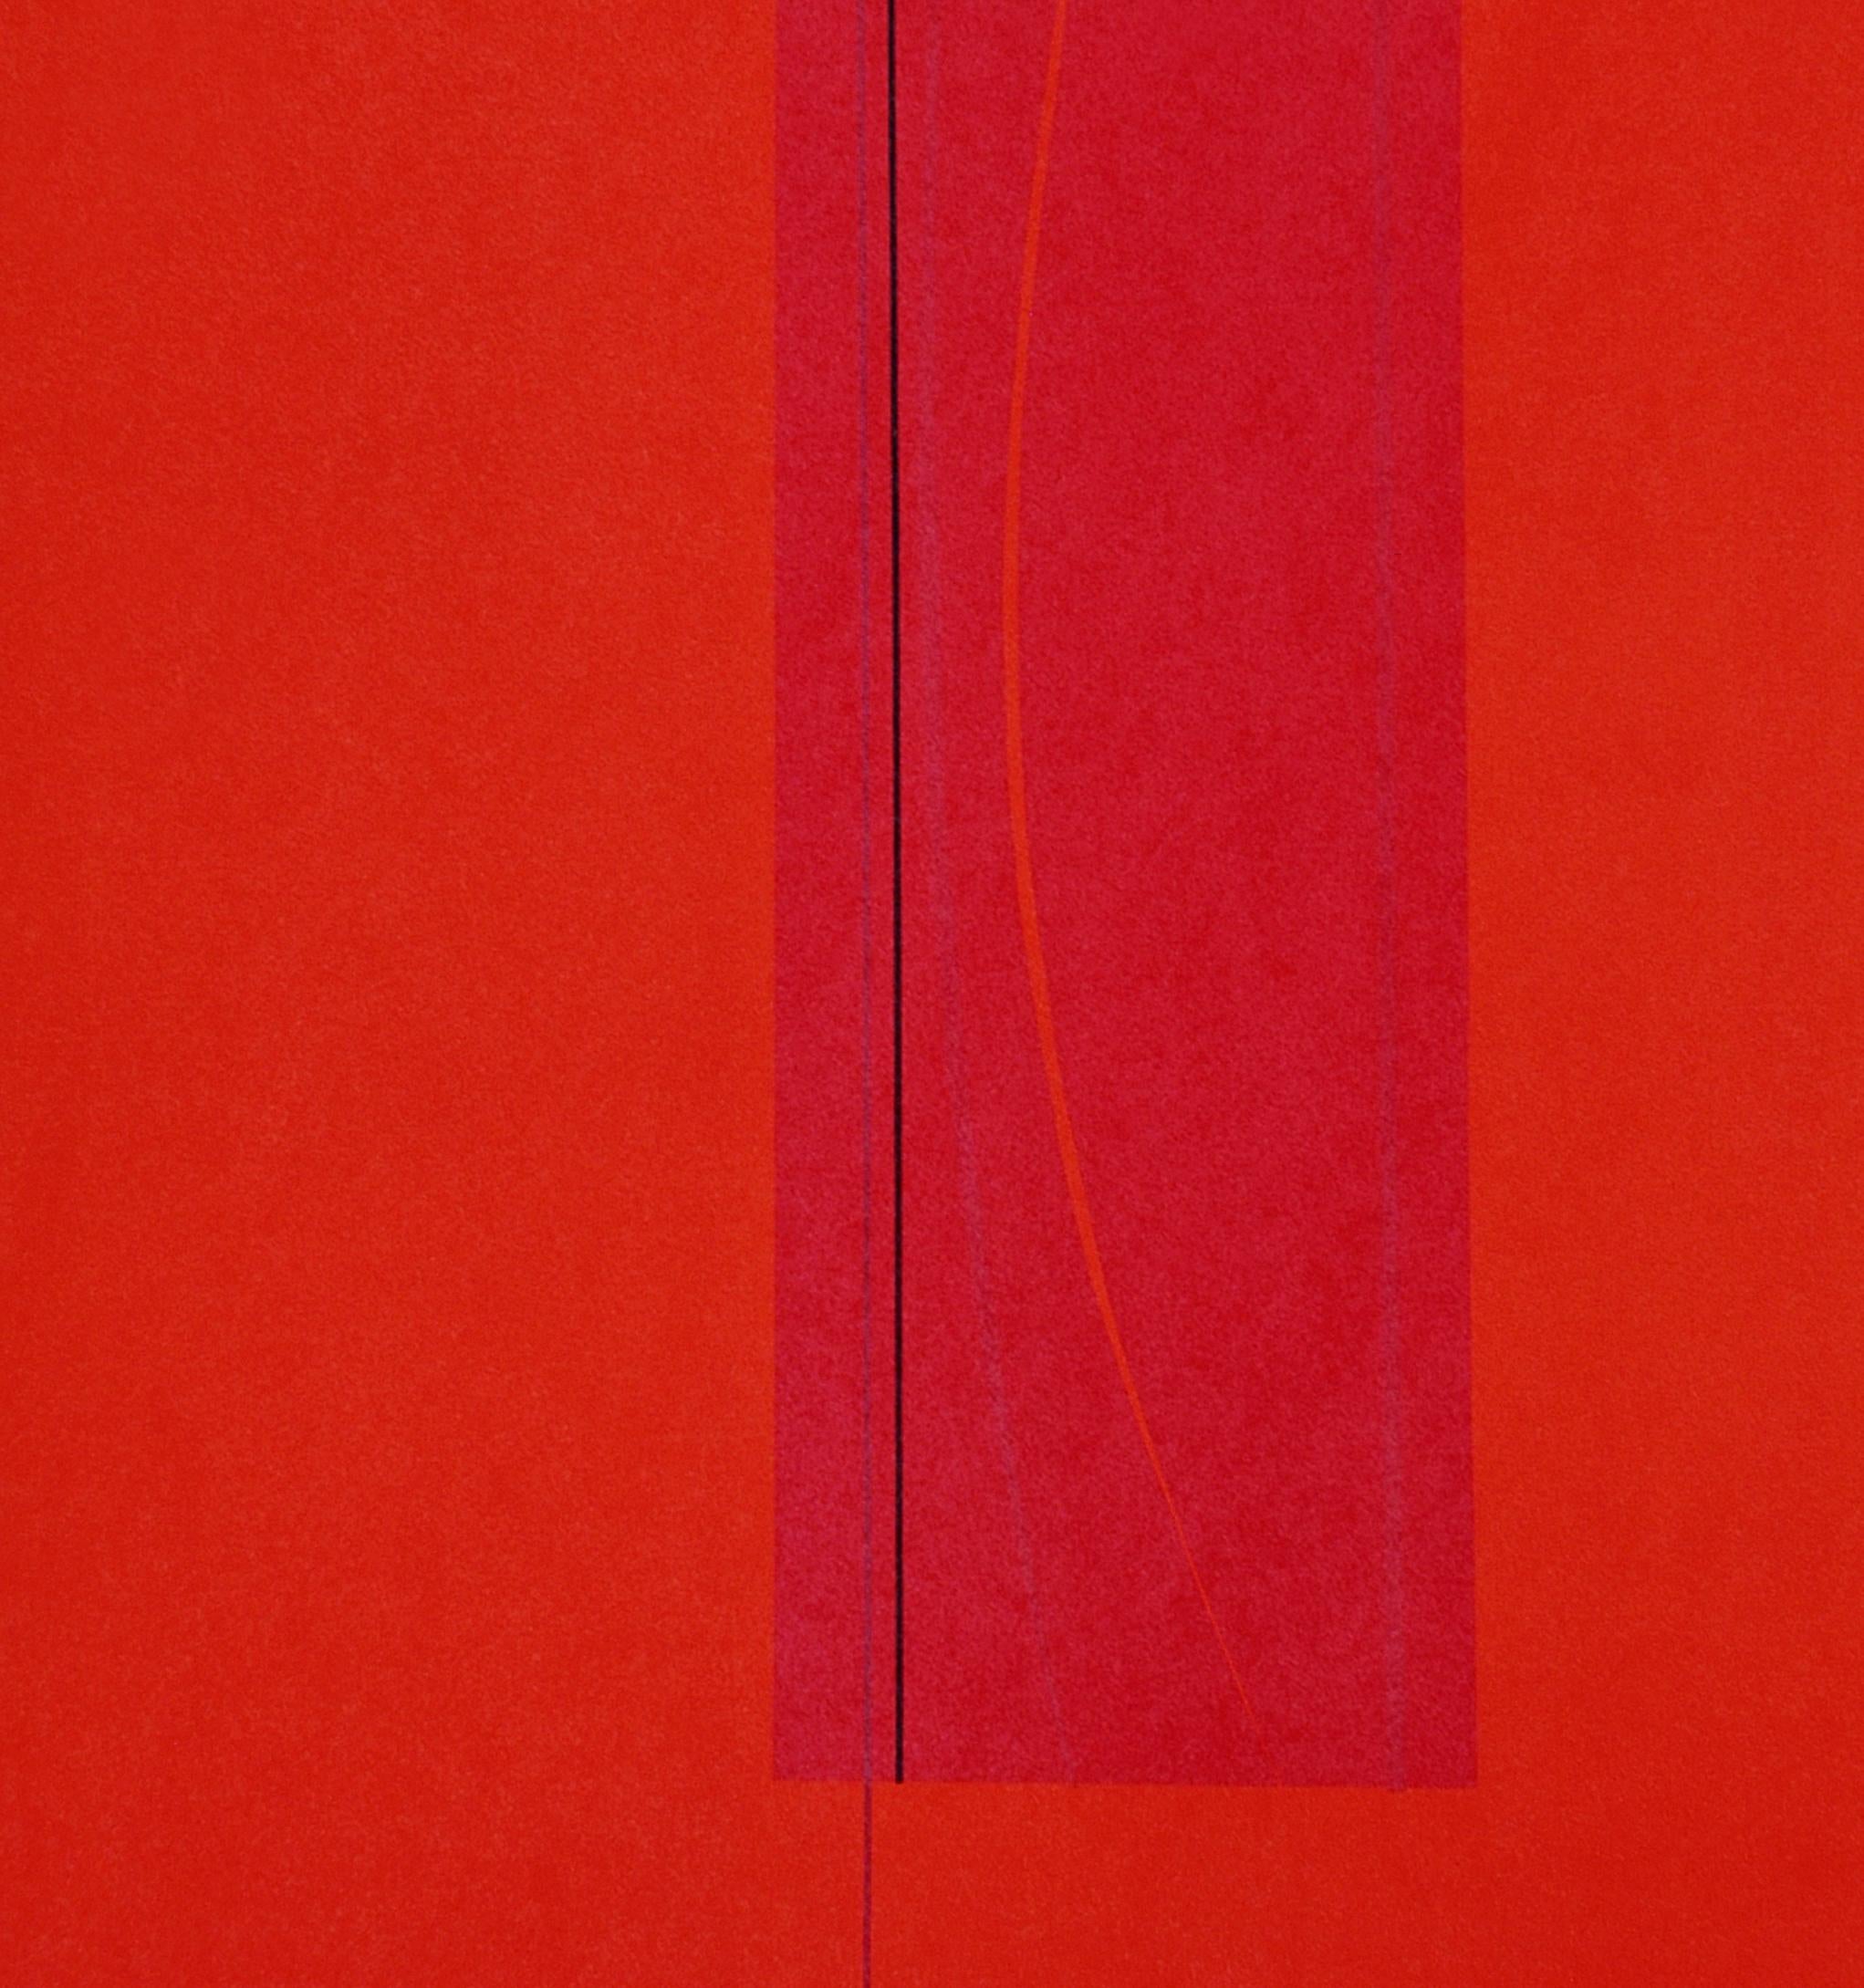 Red Six - Original Lithograph by Lorenzo Indrimi - 1970 ca. 2